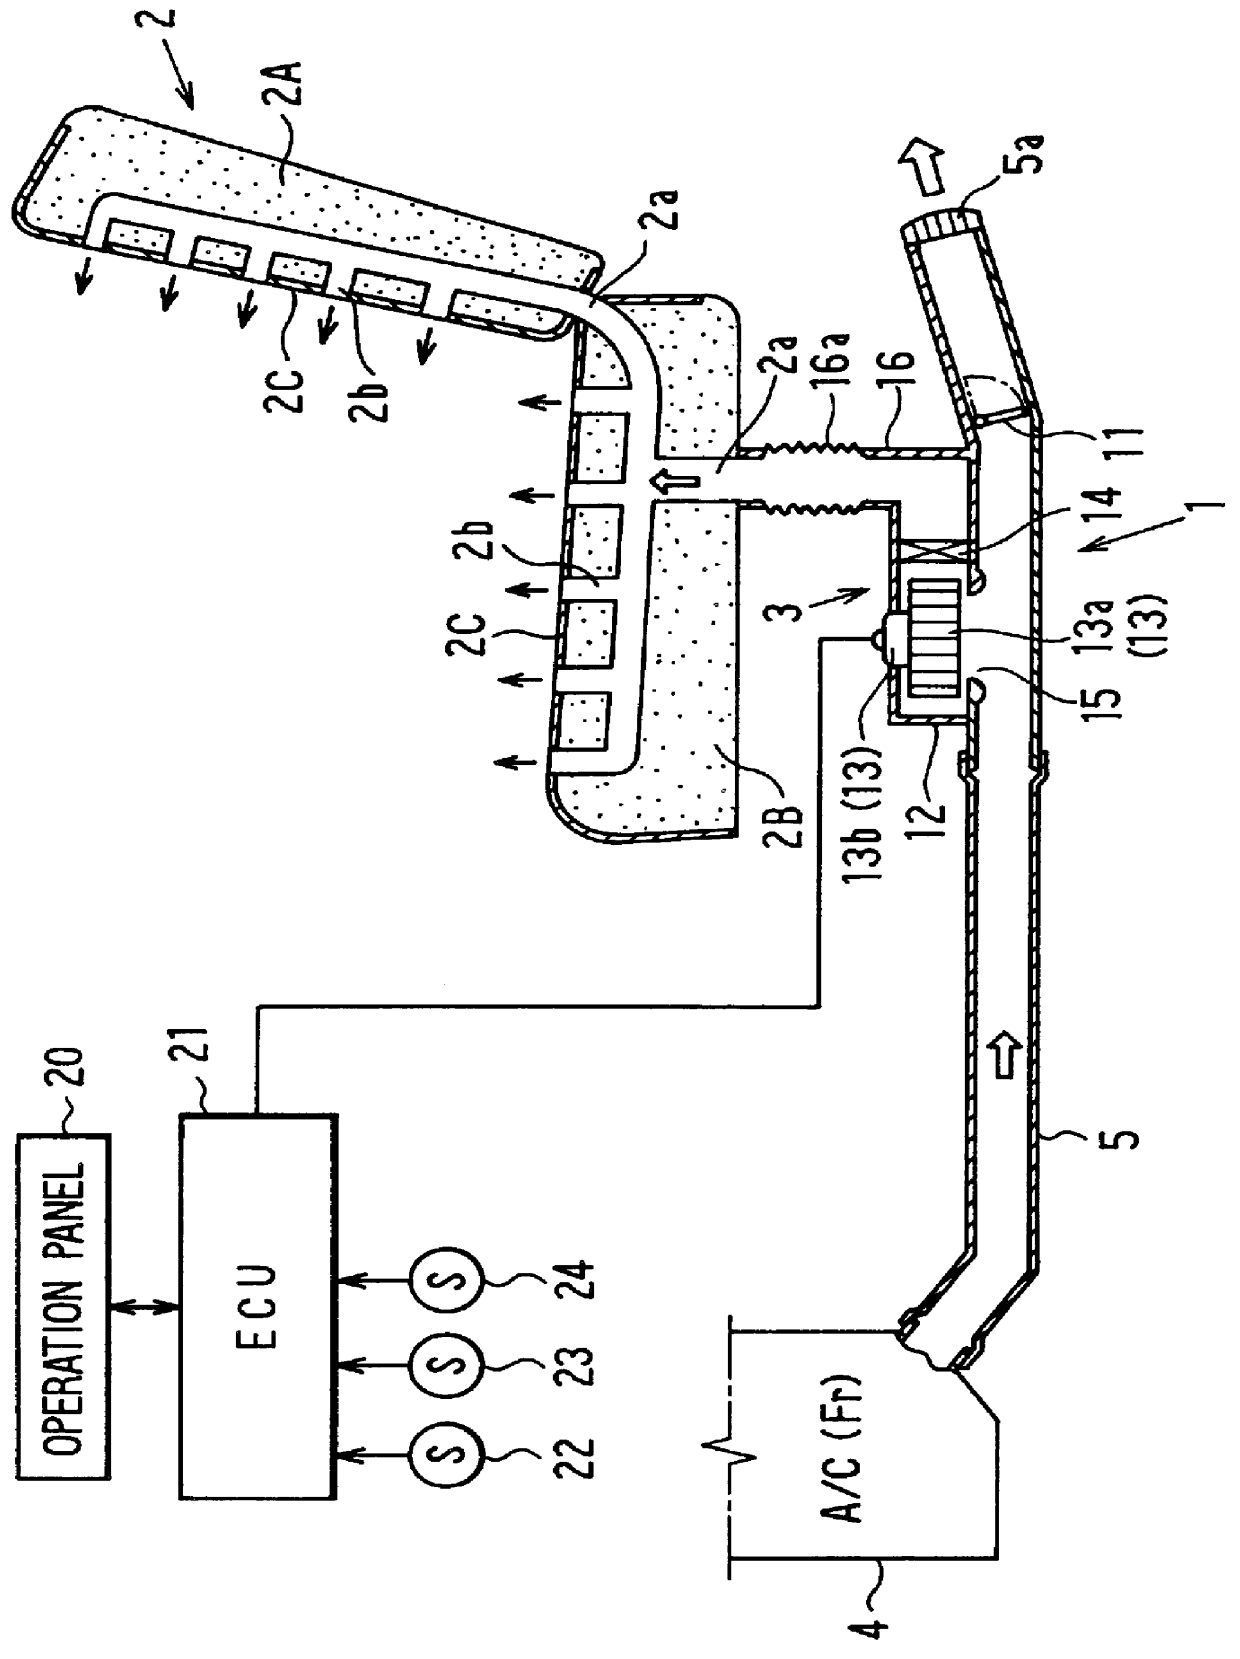 Air conditioning apparatus for vehicle seat